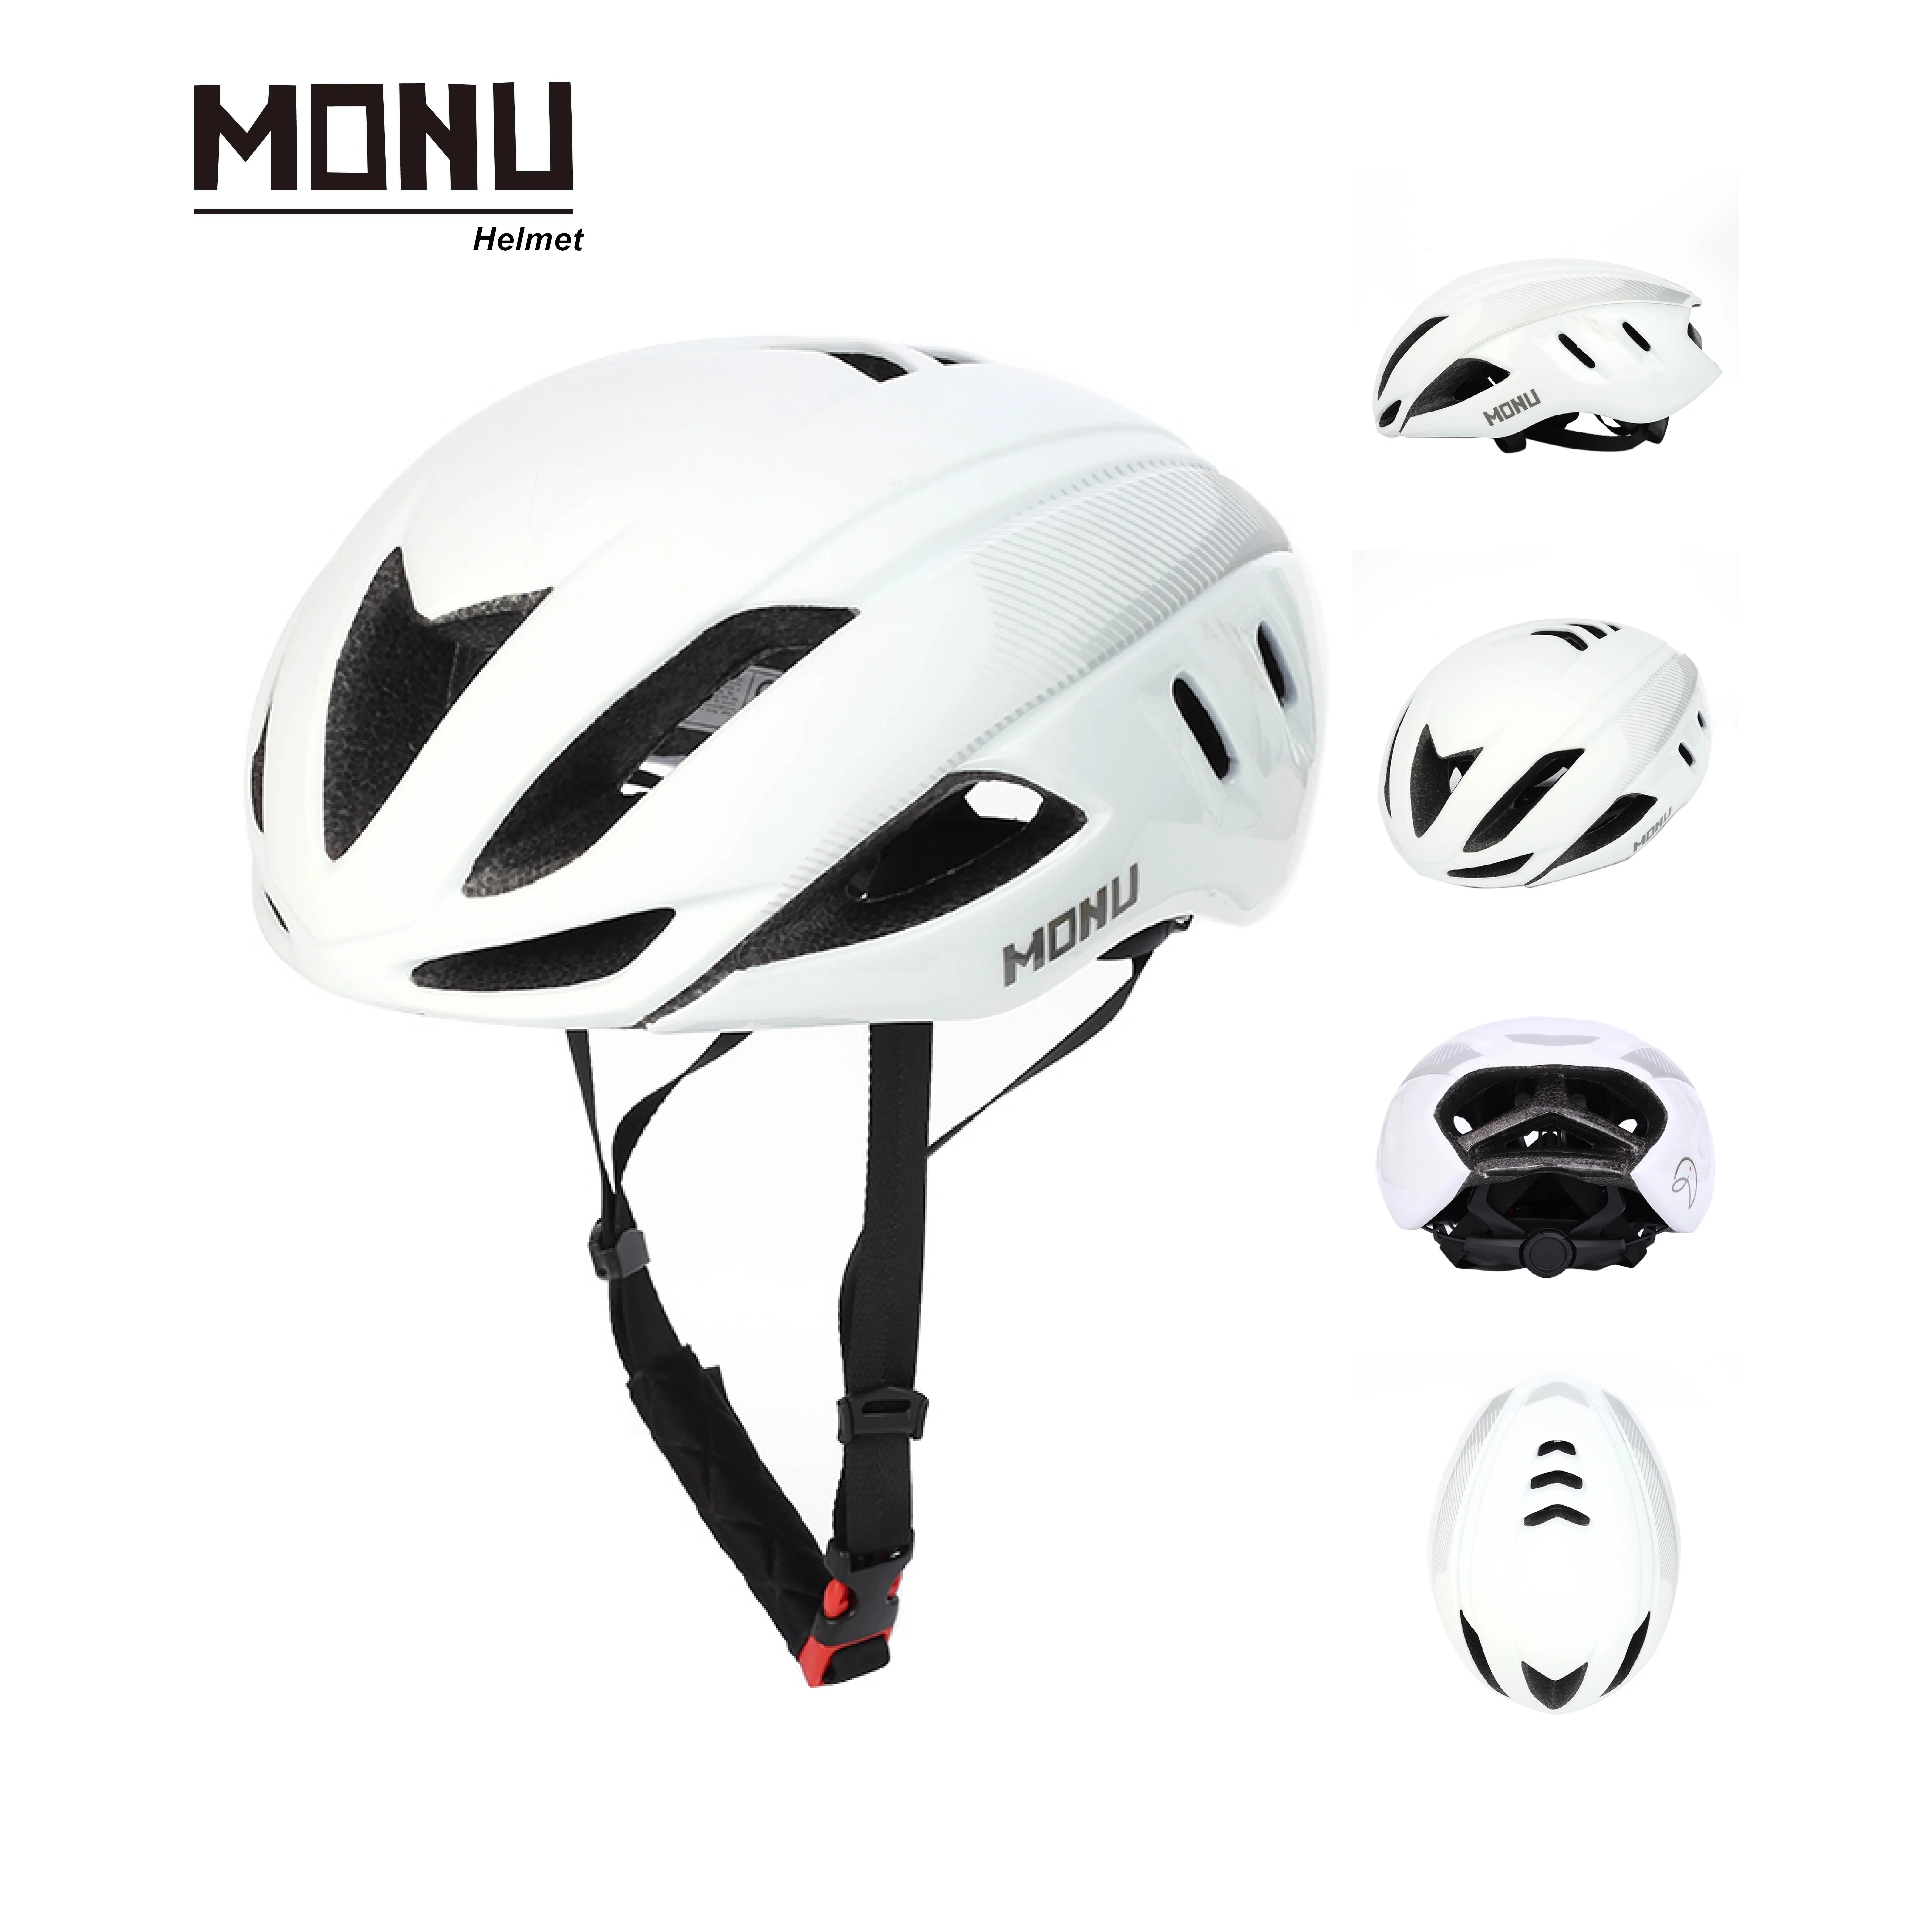 

MONU RTS MTB Bicycle Helmet Adjustable Bicycle Cycling Mountain Bike Sports Capacete Ciclismo Safety Helmet Cycling Accessories, Rose red